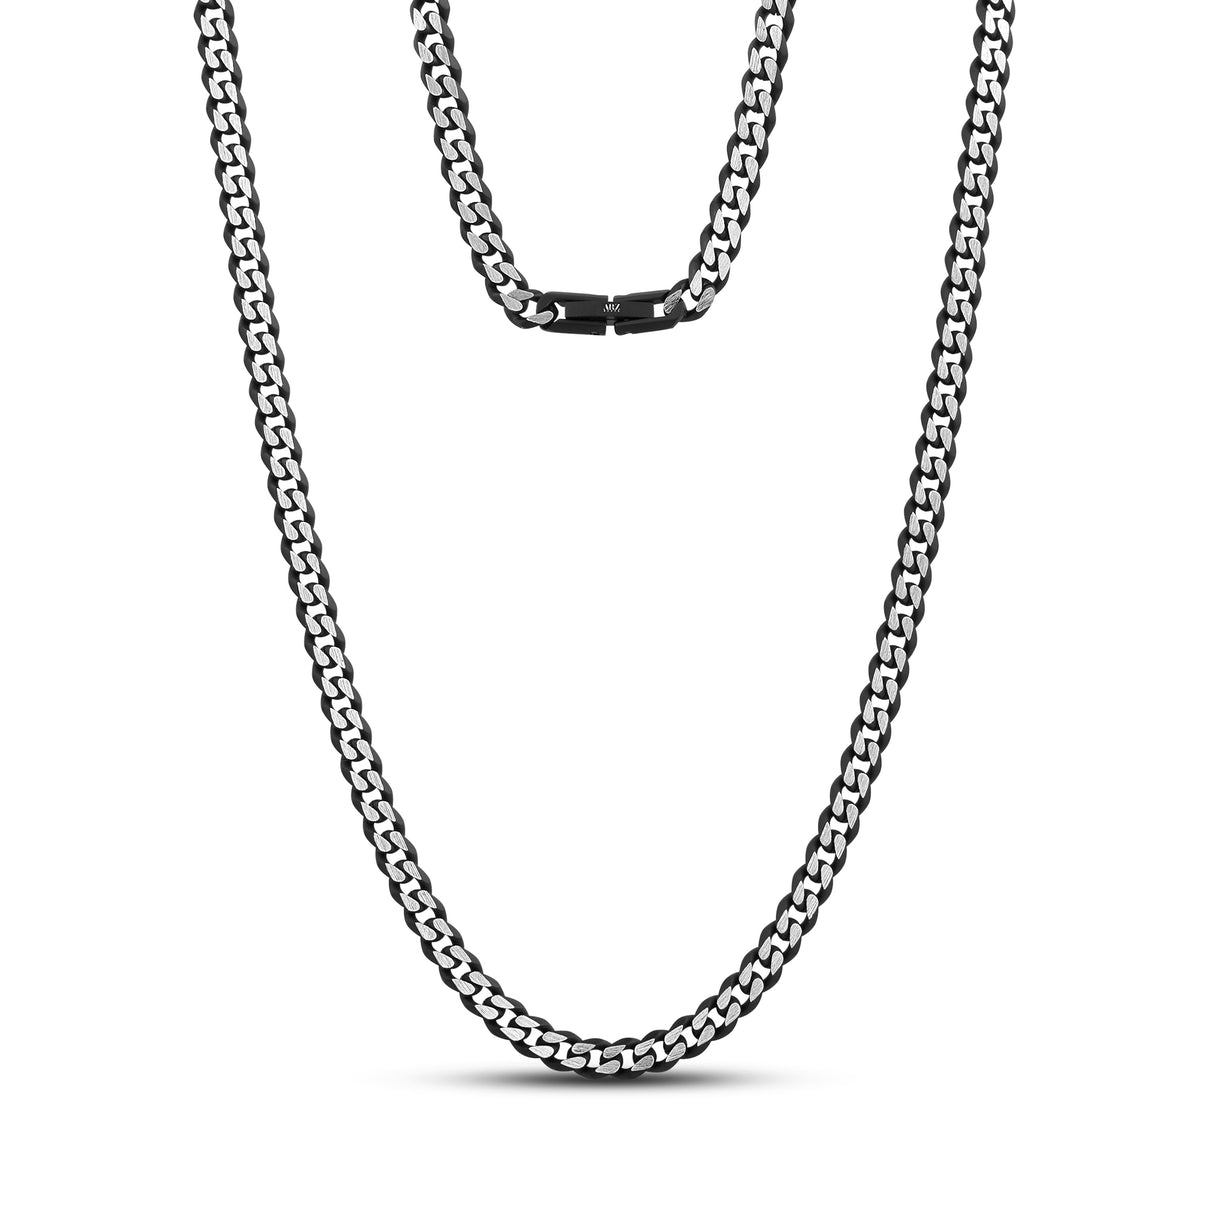 5mm Two Tone Cuban Link Chain - Unisex Necklaces - The Steel Shop